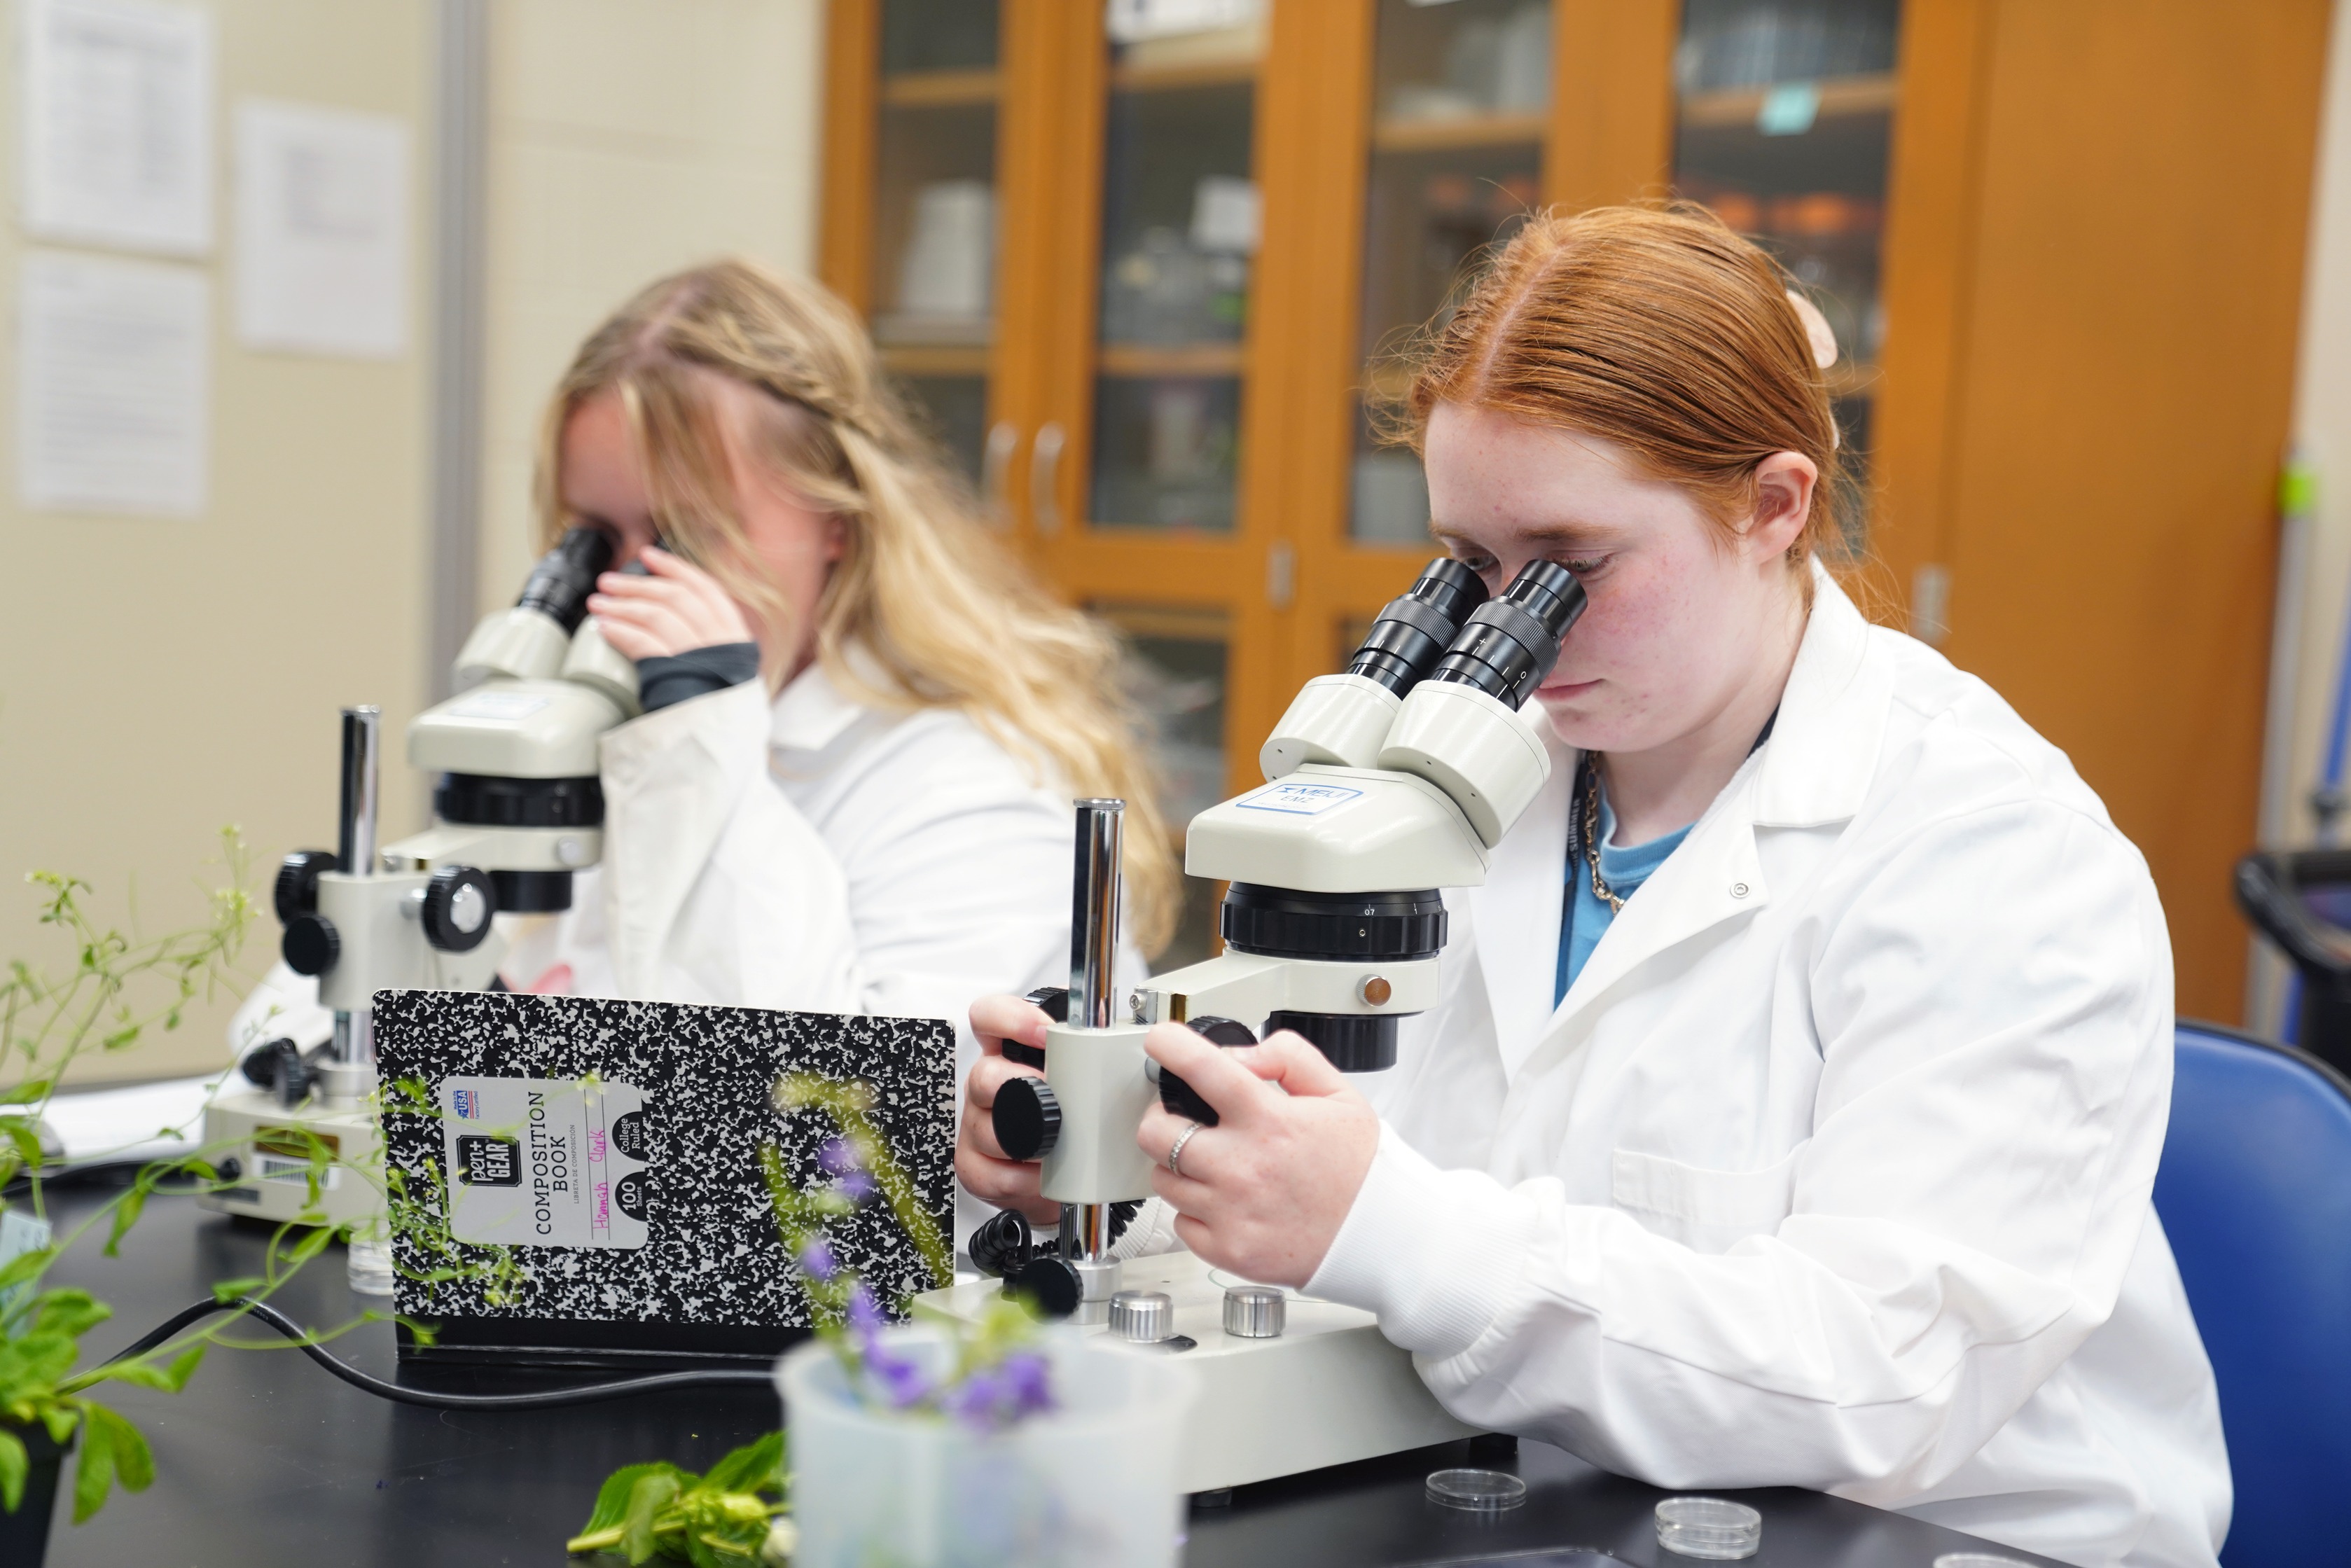 High school students examine plant material under microscopes.